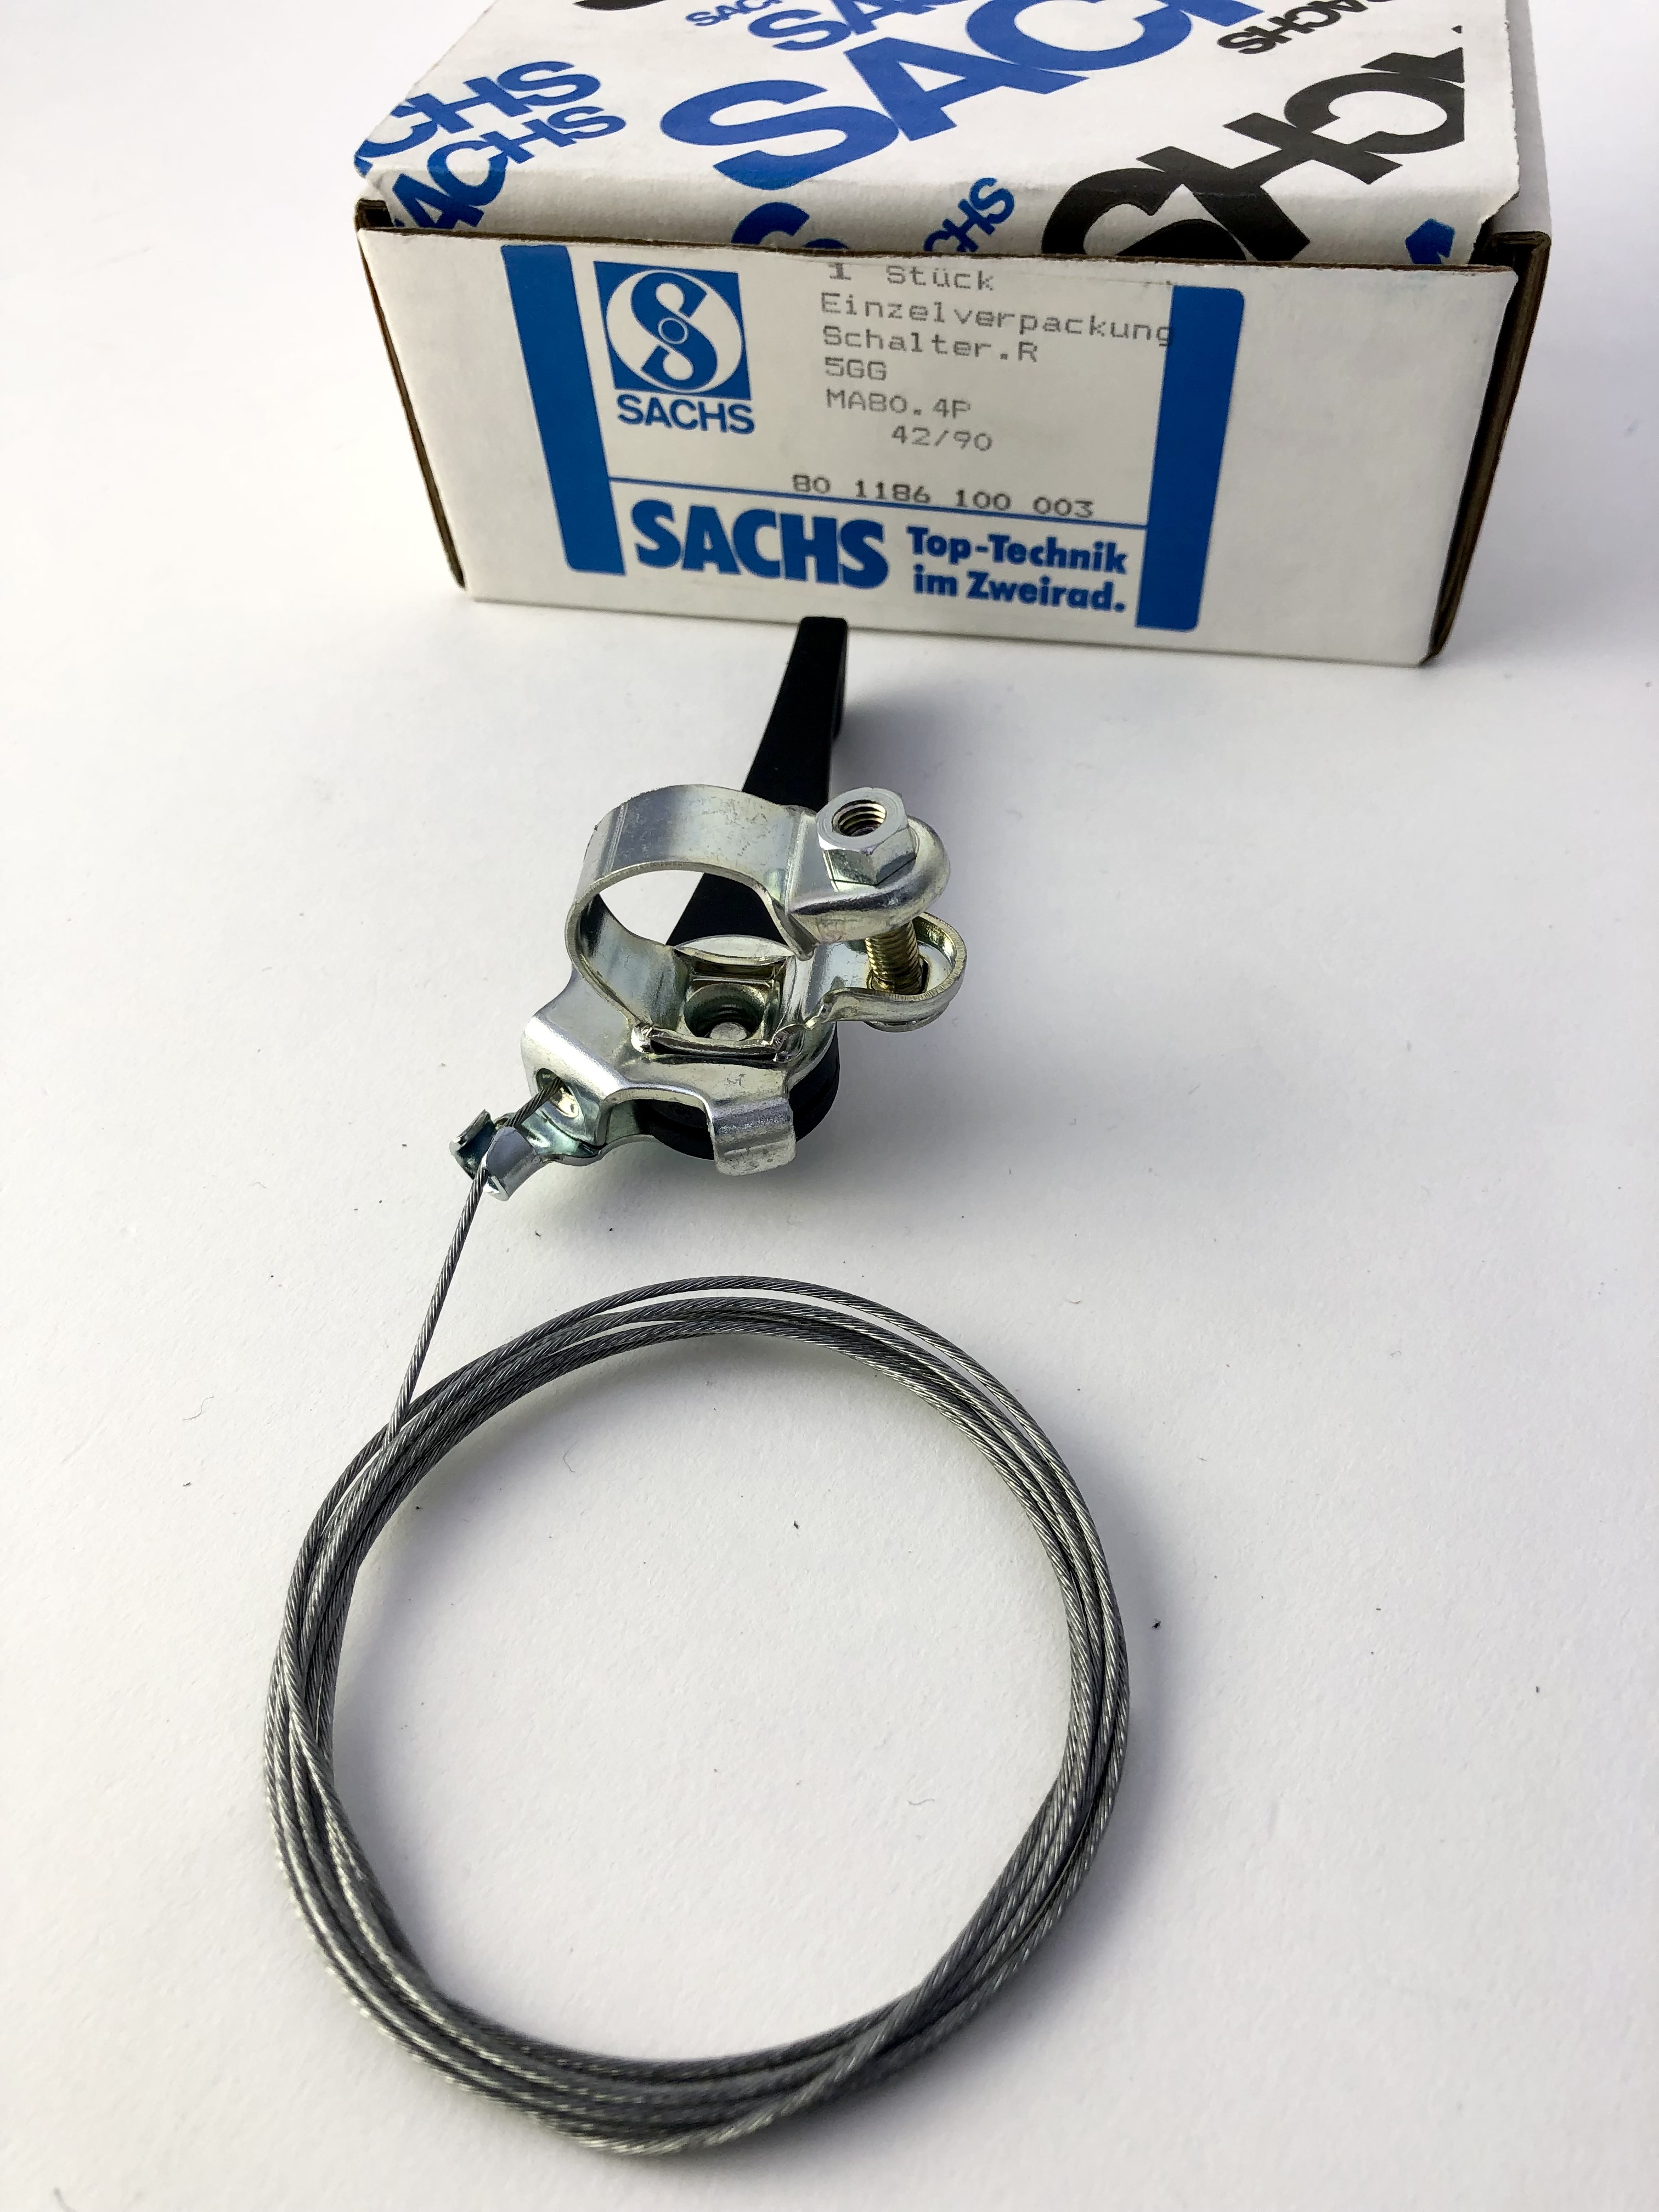 NOS gear lever from Sachs Huret for mounting on handlebar stem